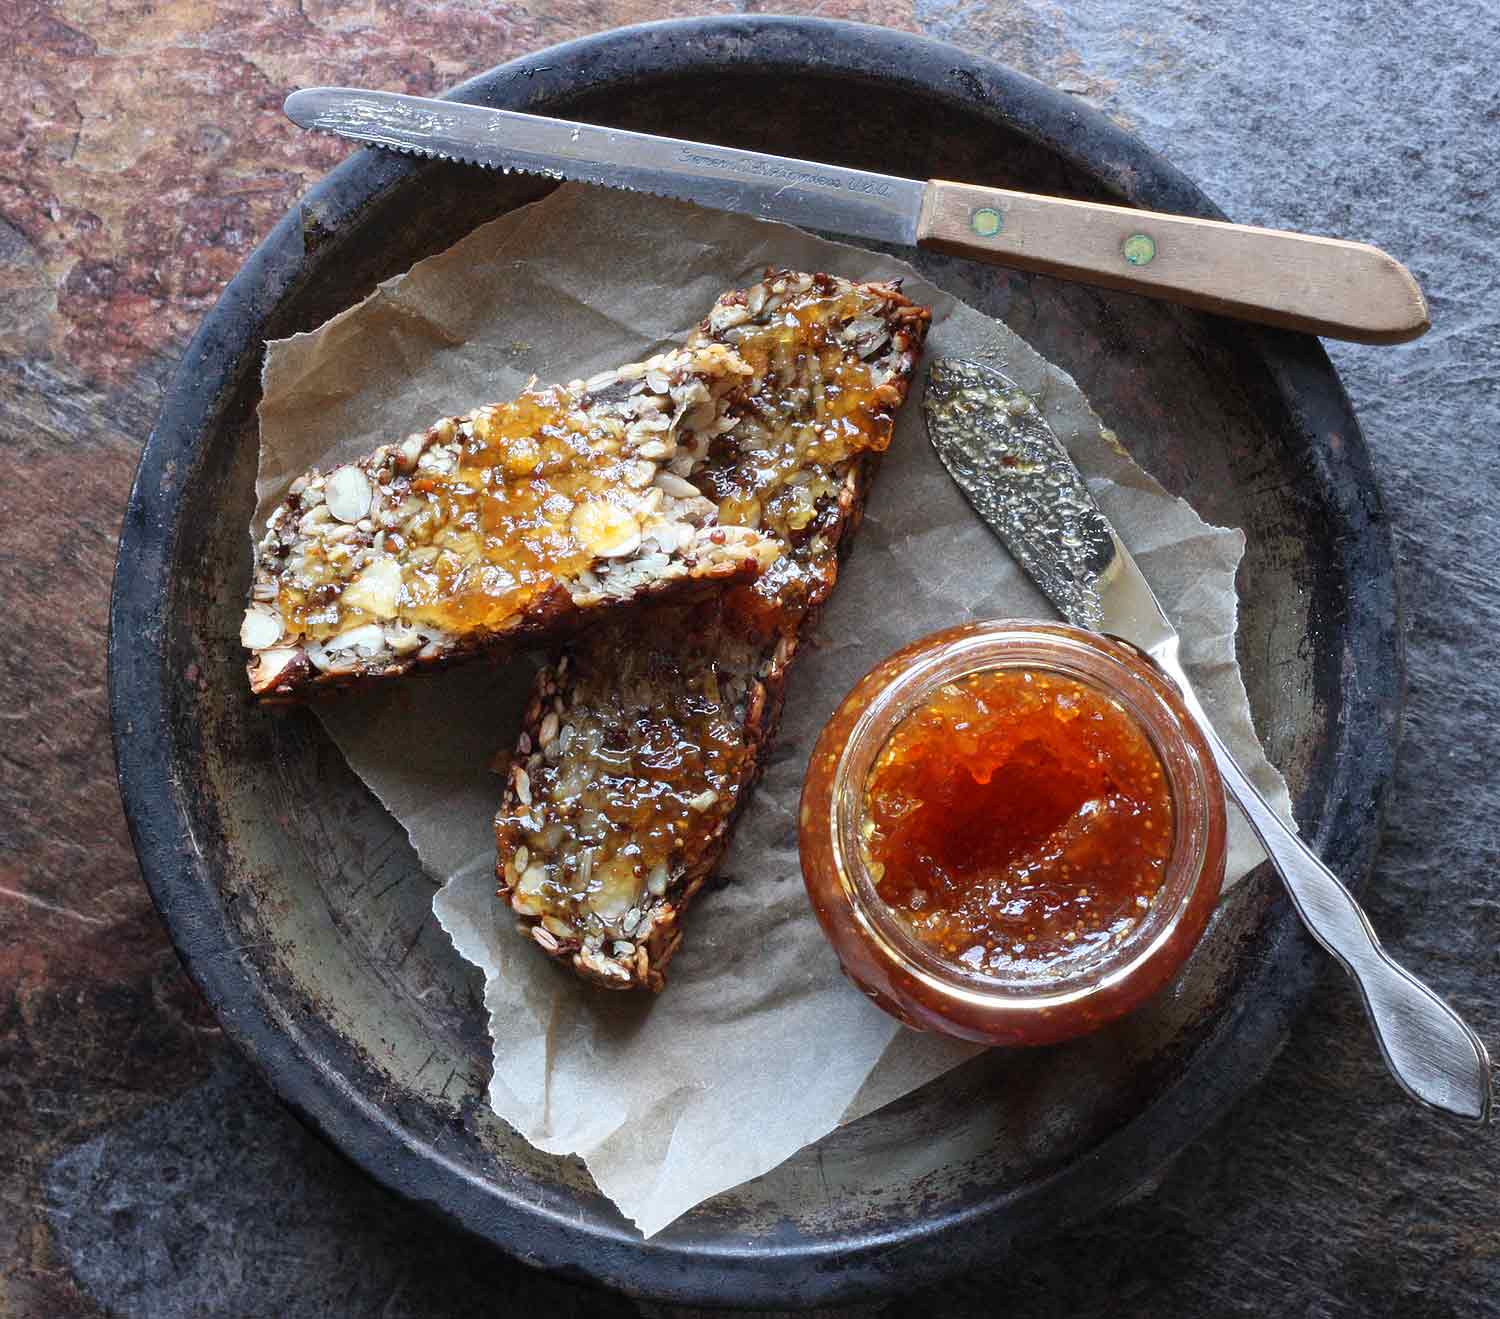 Two slices of Magic Seed and Nut Loaf spread with orange marmalade.